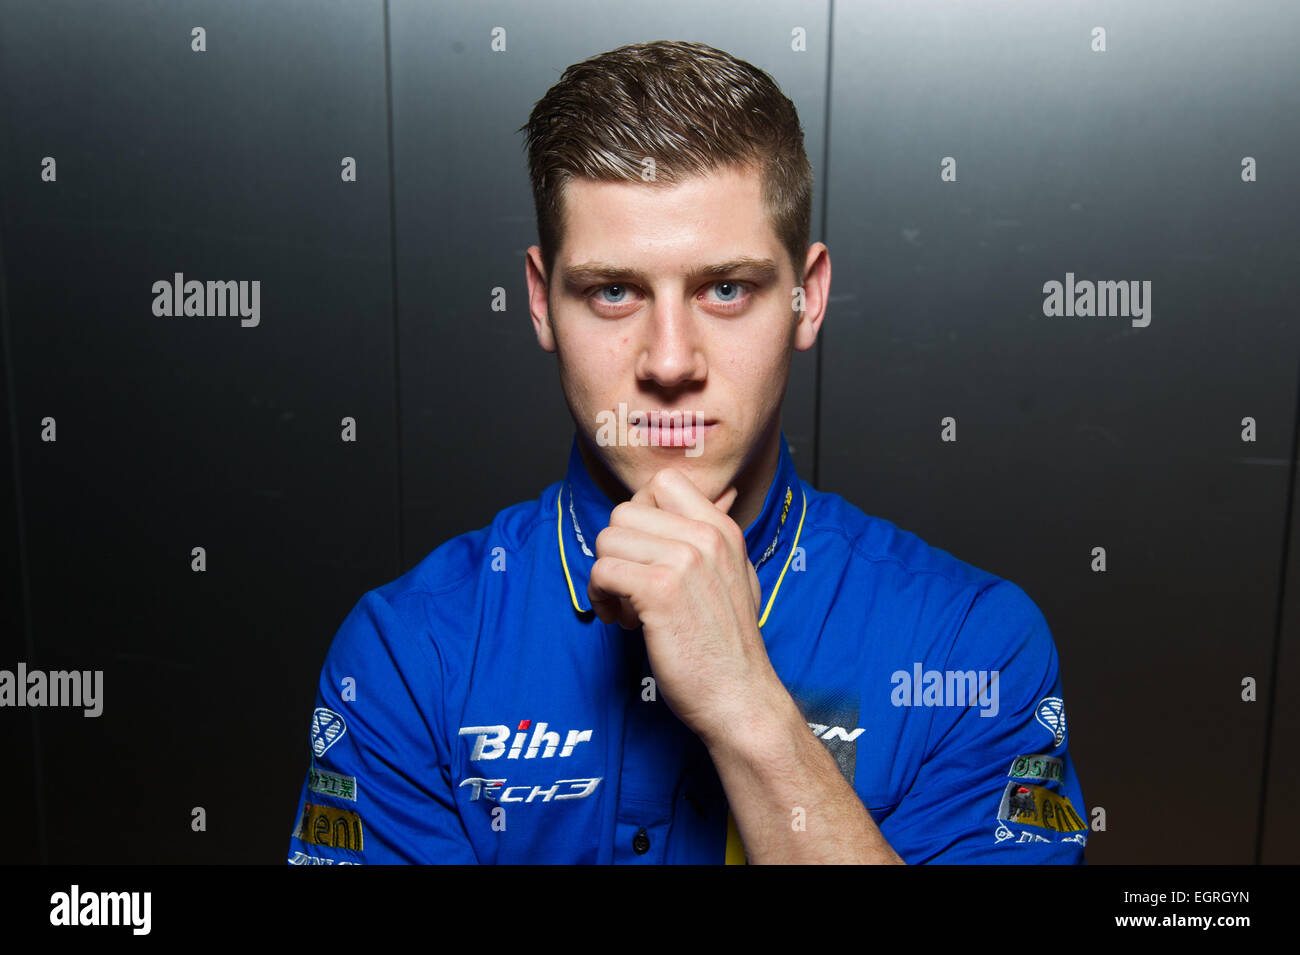 Munich, Germany. 25th Feb, 2015. German moto2 motorcyclist Marcel Schroetter of Team Tech3 poses during a press event in Munich, Germany, 25 February 2015. Photo: Tobias Hase/dpa/Alamy Live News Stock Photo